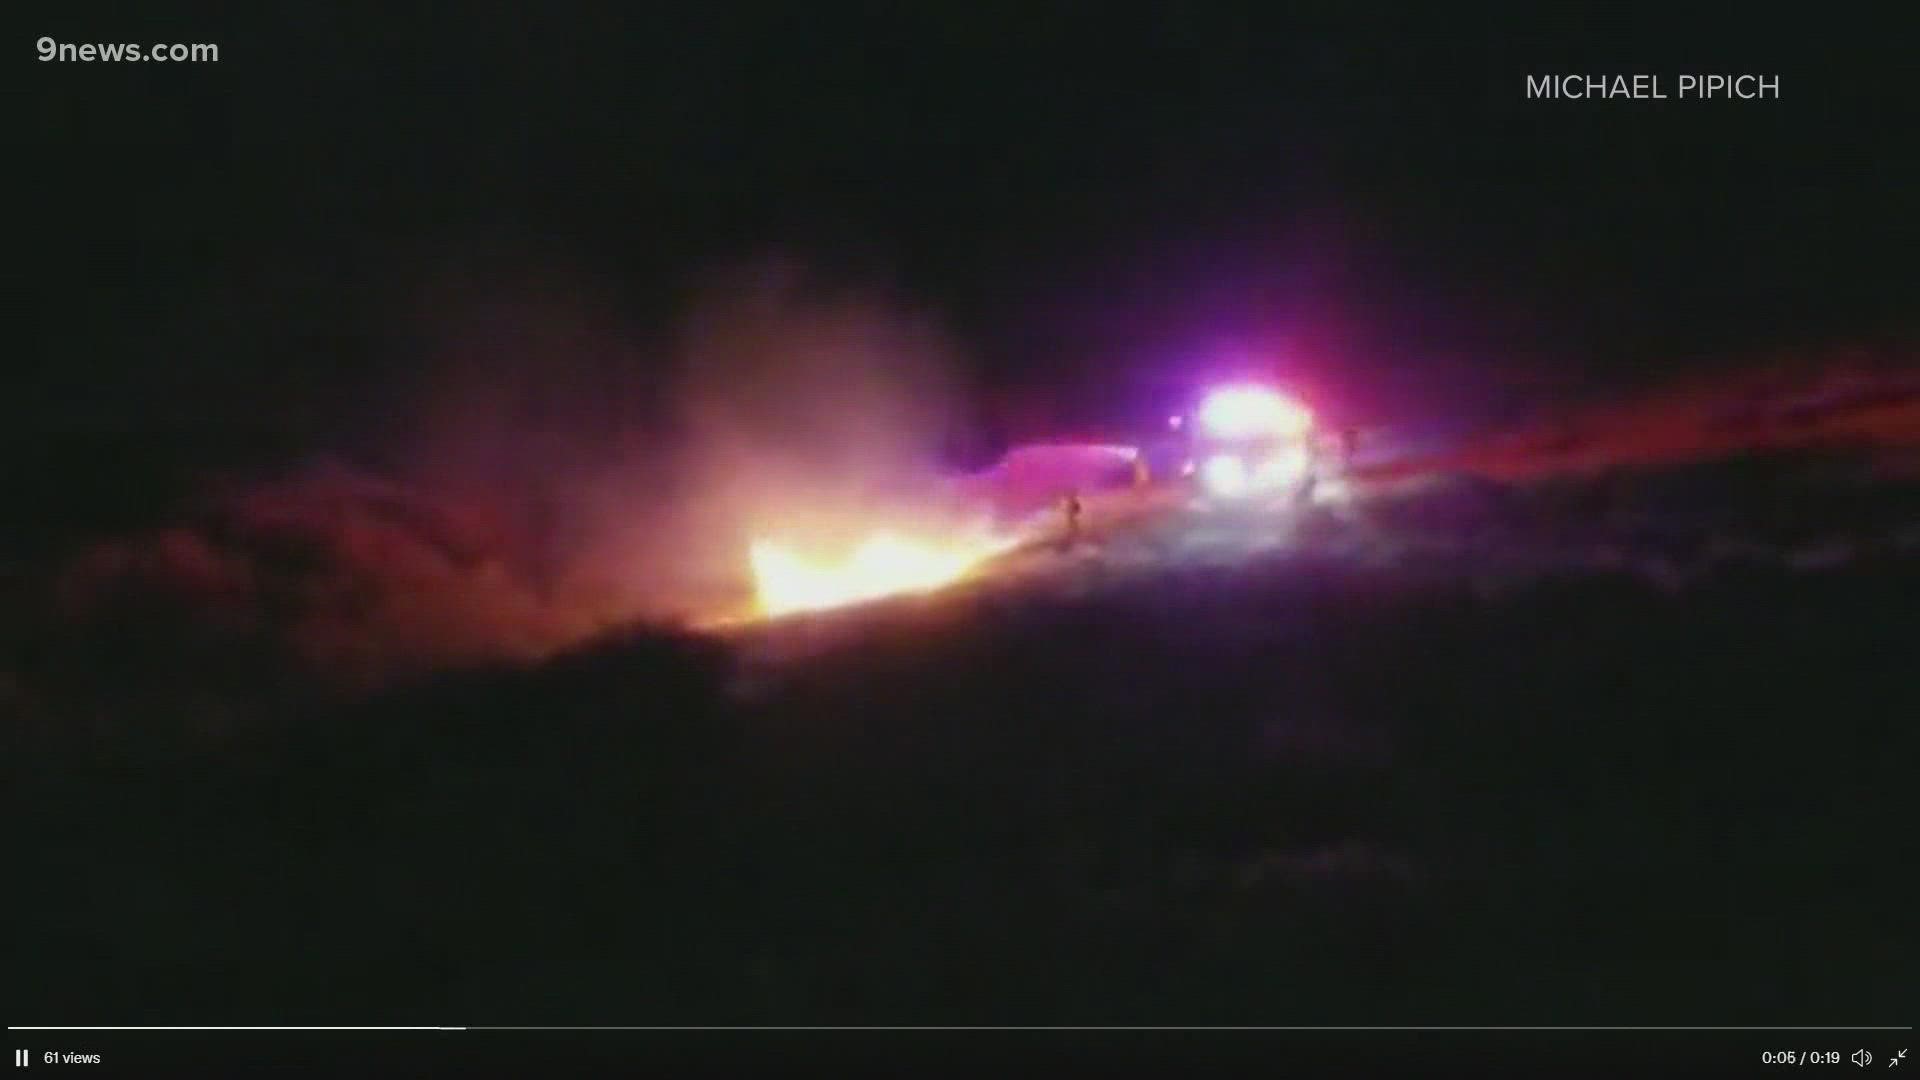 “Personally, in my opinion, the firework displays were not a great idea,” the Douglas County sheriff told 9NEWS. “It was obvious that we were in dry conditions.”